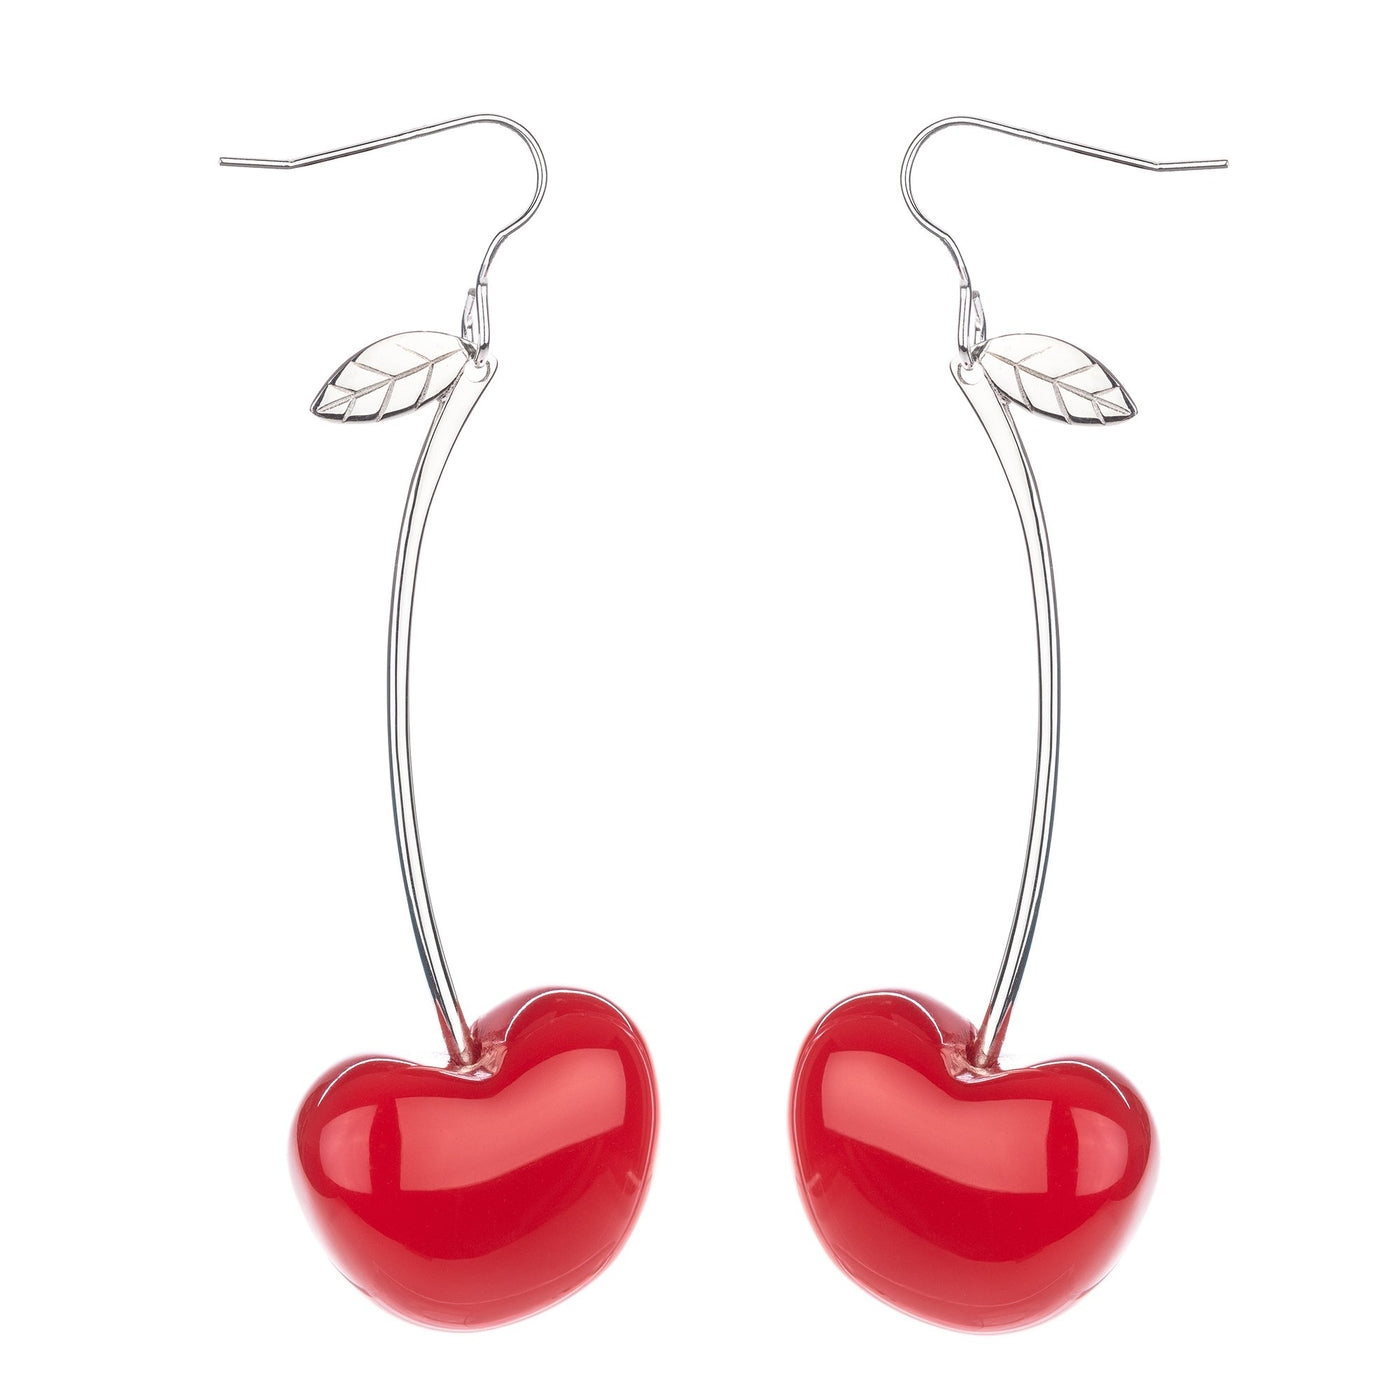 Tina Lilienthal Cherry Earrings